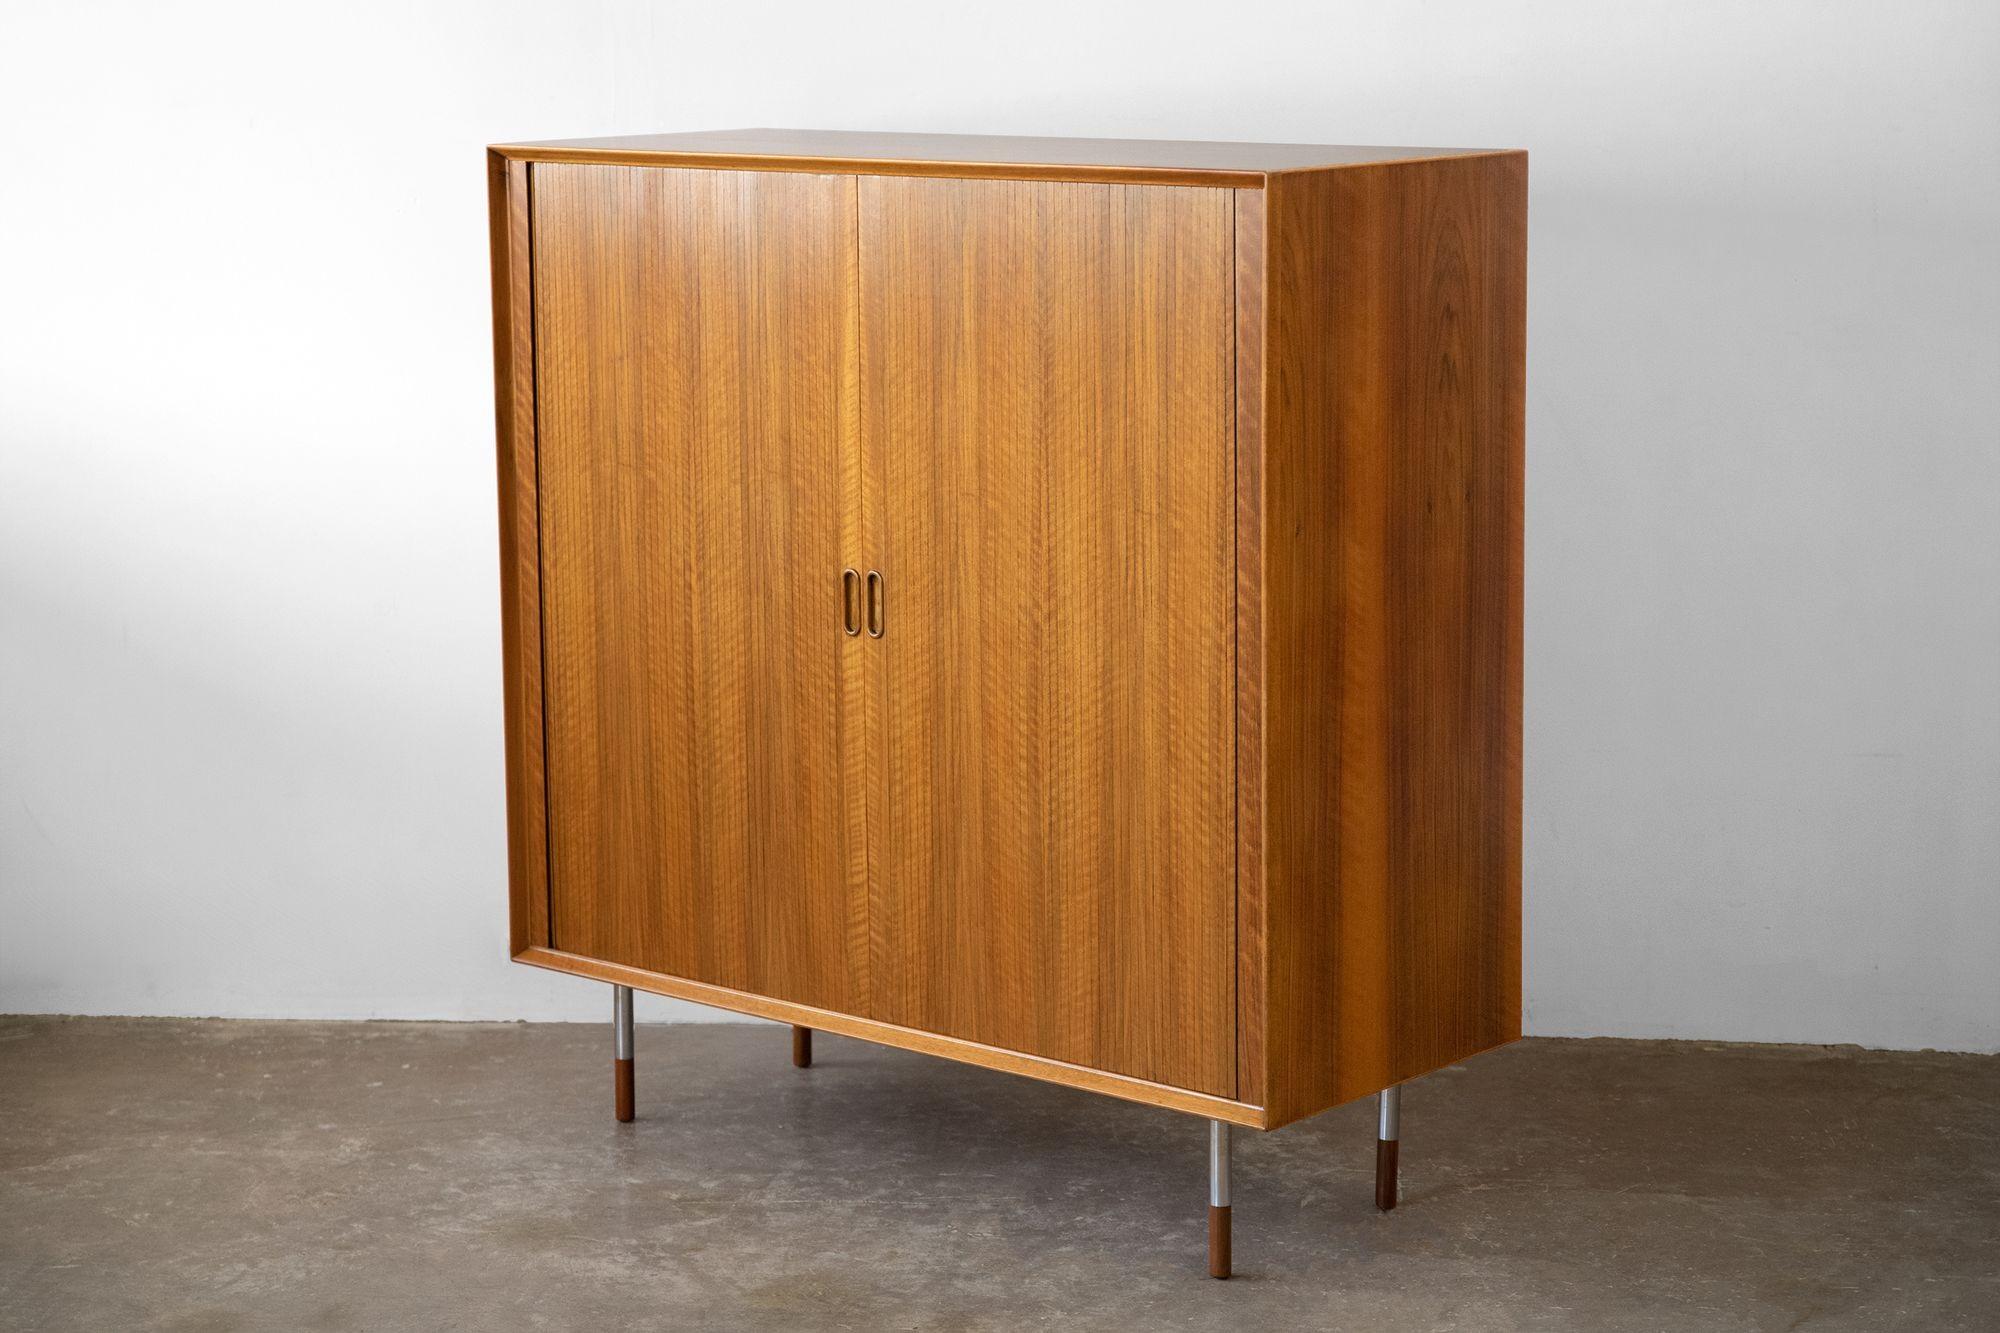 Exquisitely crafted upright storage cabinet designed by Arne Vodder and produced by Sibast of Denmark. 
The tambour doors are very well constructed and function smoothly and as intended. This is an early example with the more desirable petite steel